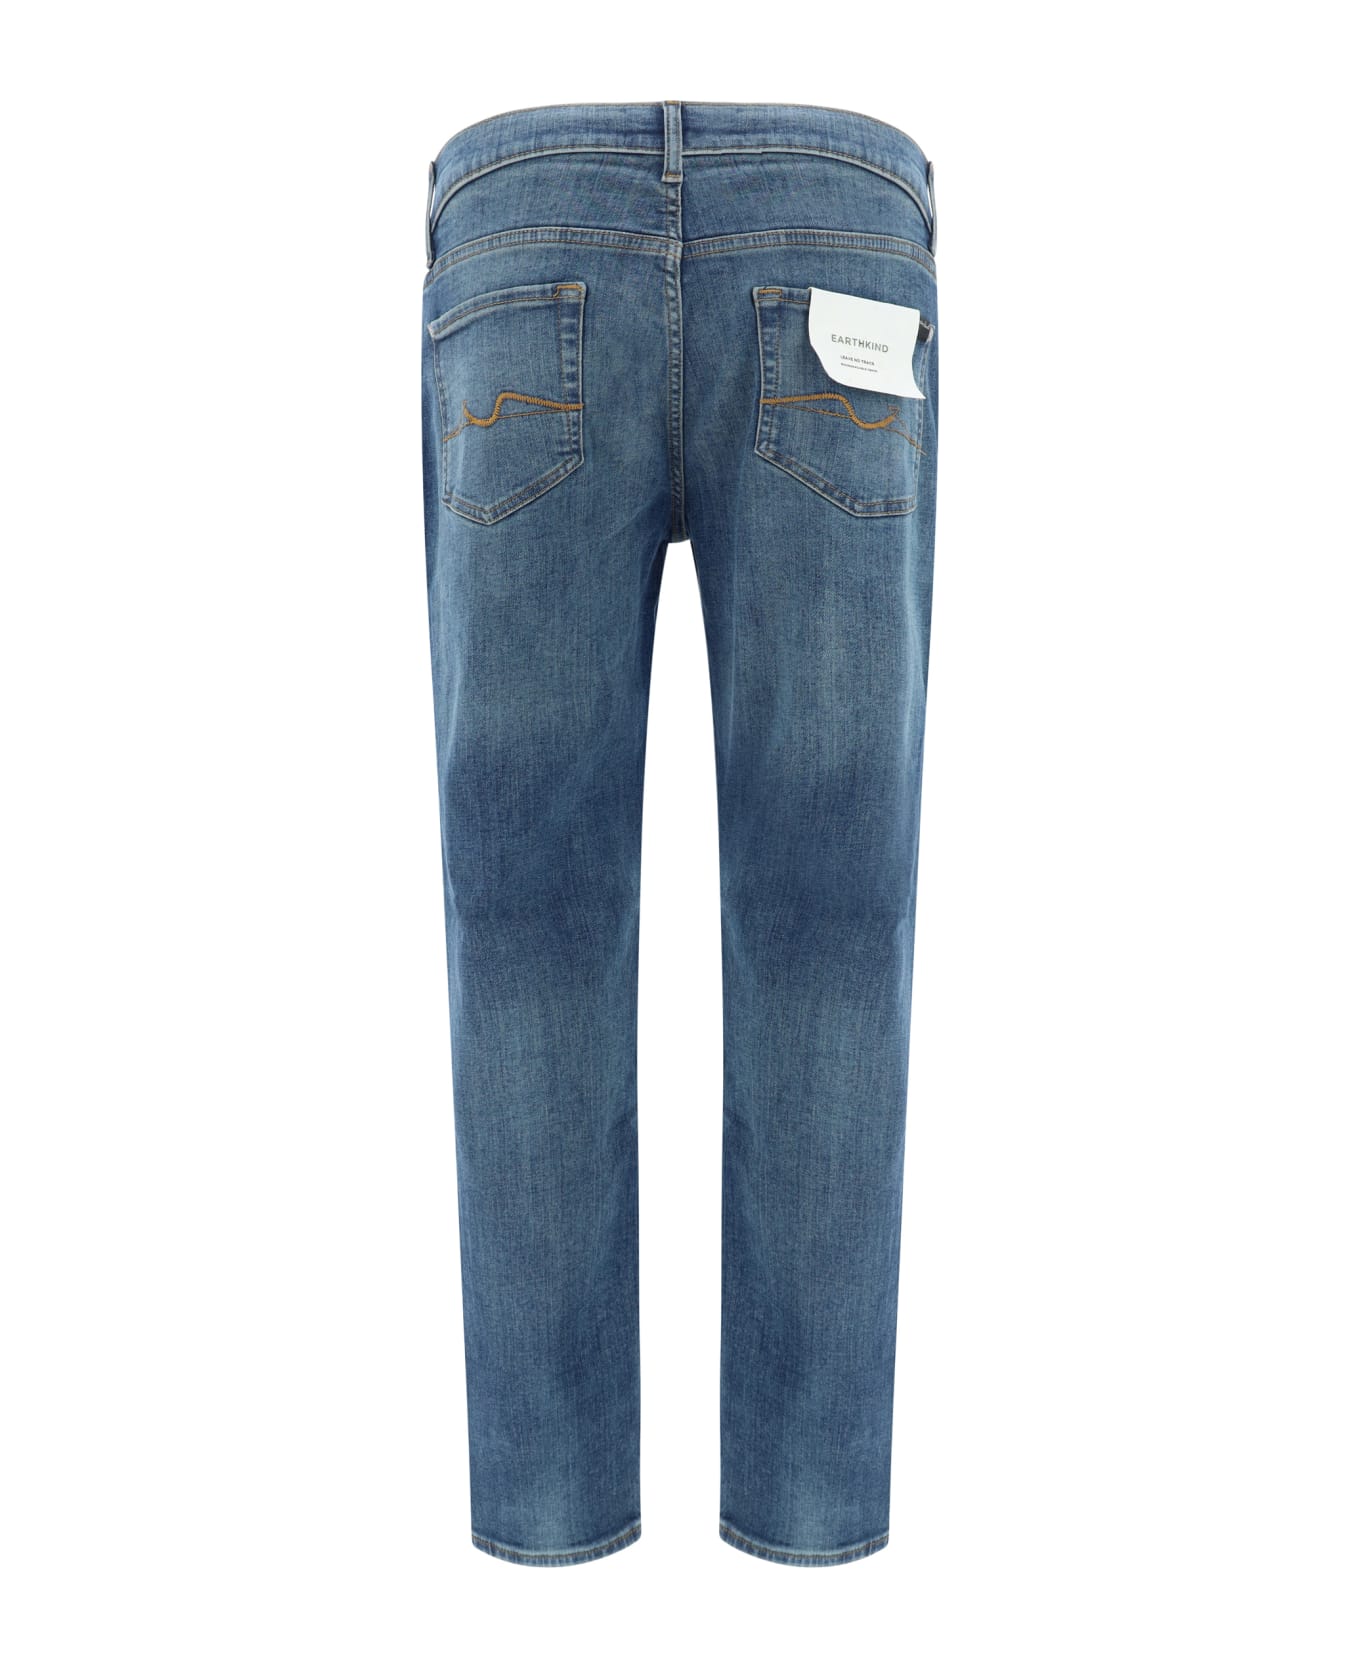 7 For All Mankind Jeans - Mid Blue デニム